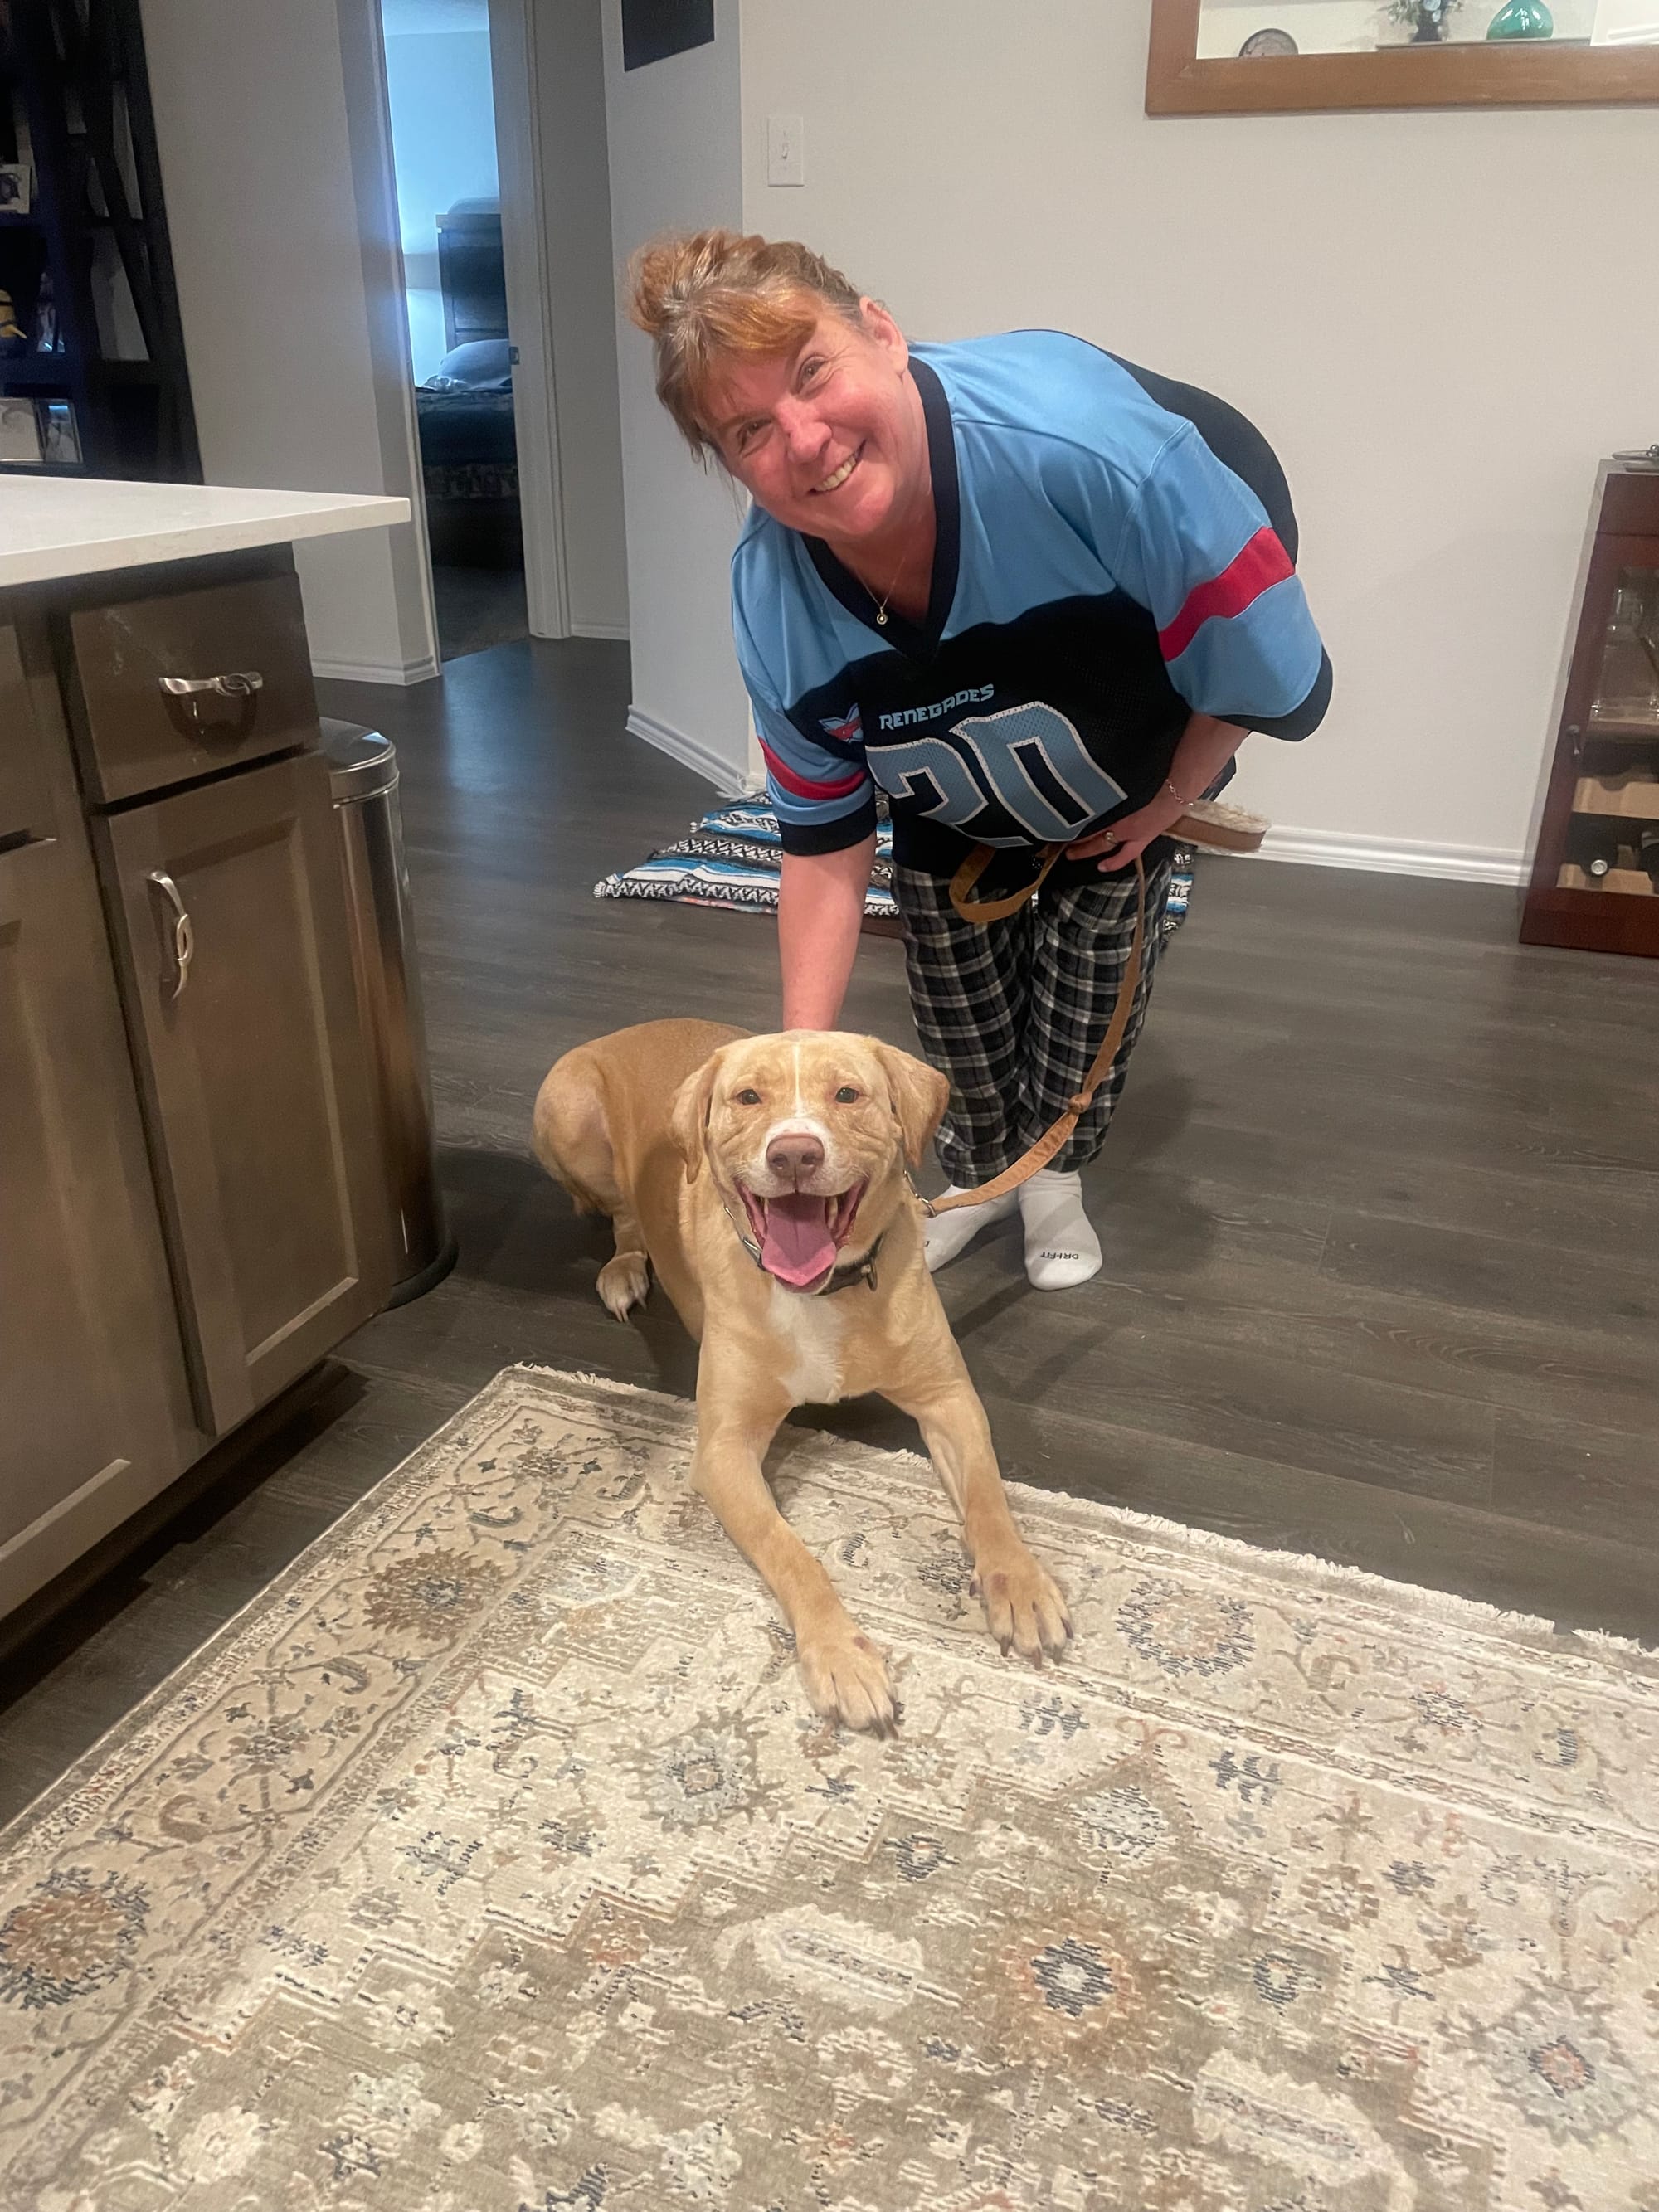 Rescue Spotlight: Meet Missy Redding, One Of The Amazing Humans Behind Bull luv able Paws Rescue